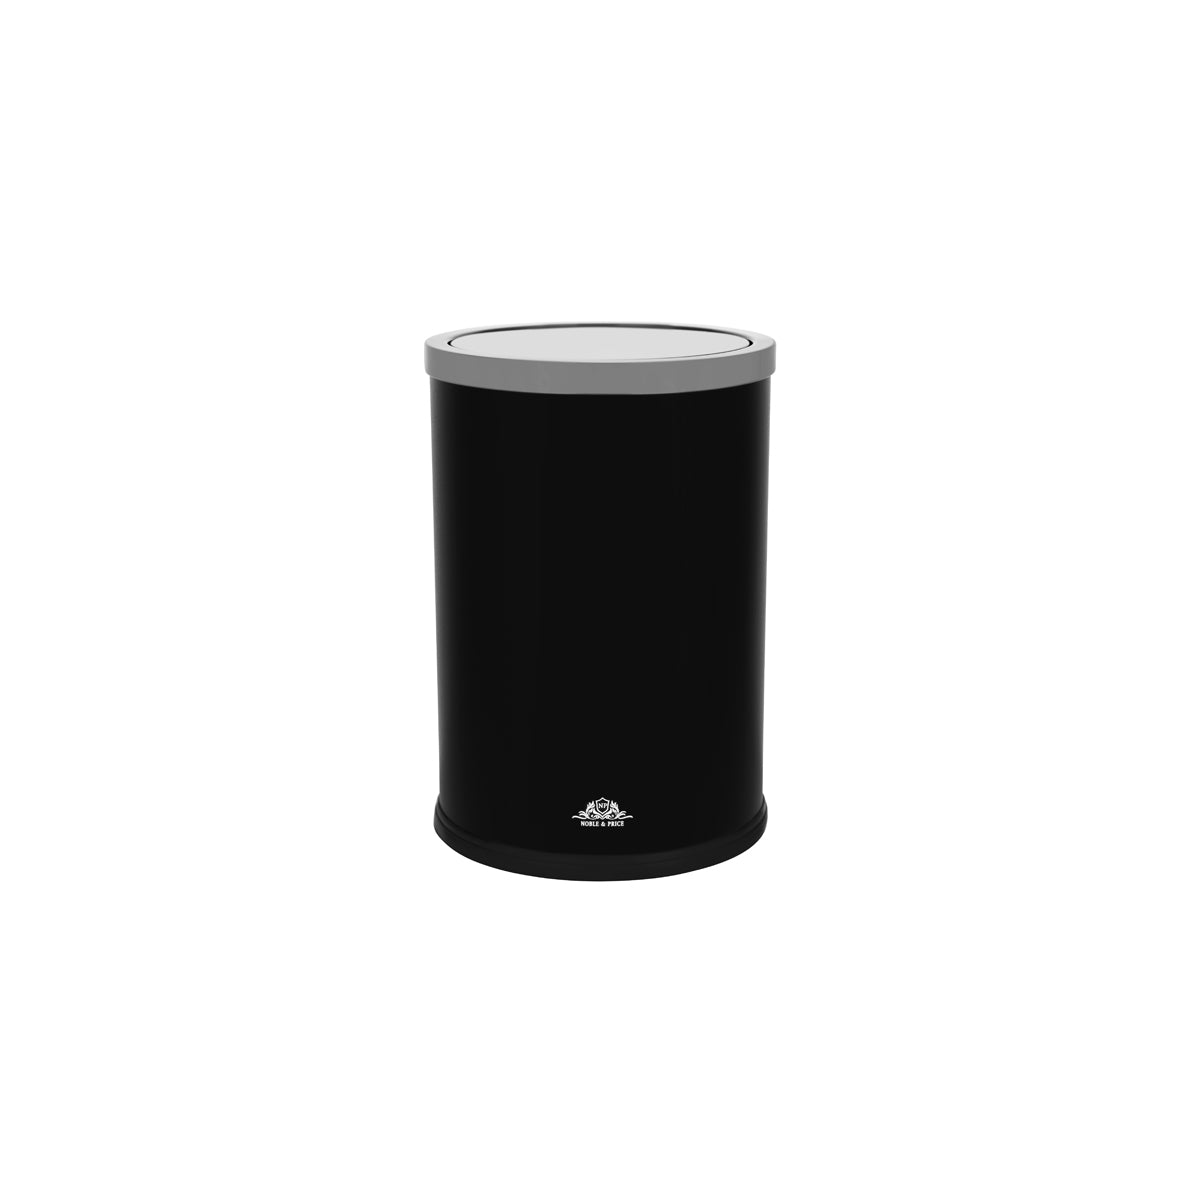 9000-01 Noble & Price Round Bin with Swing Top Black 9Lt Tomkin Australia Hospitality Supplies